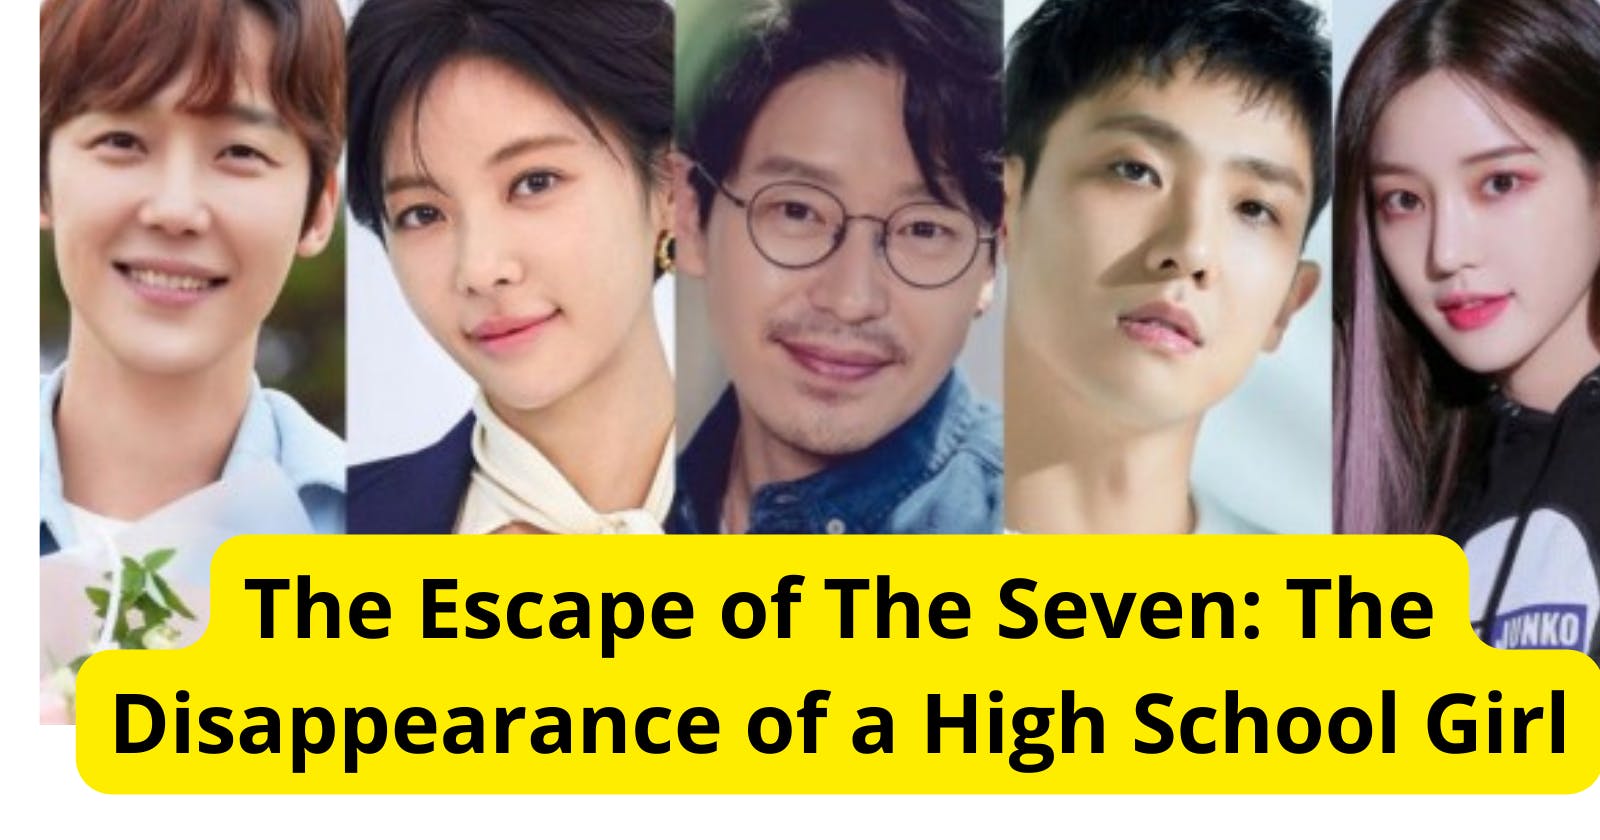 The Escape of The Seven: The Disappearance of a High School Girl